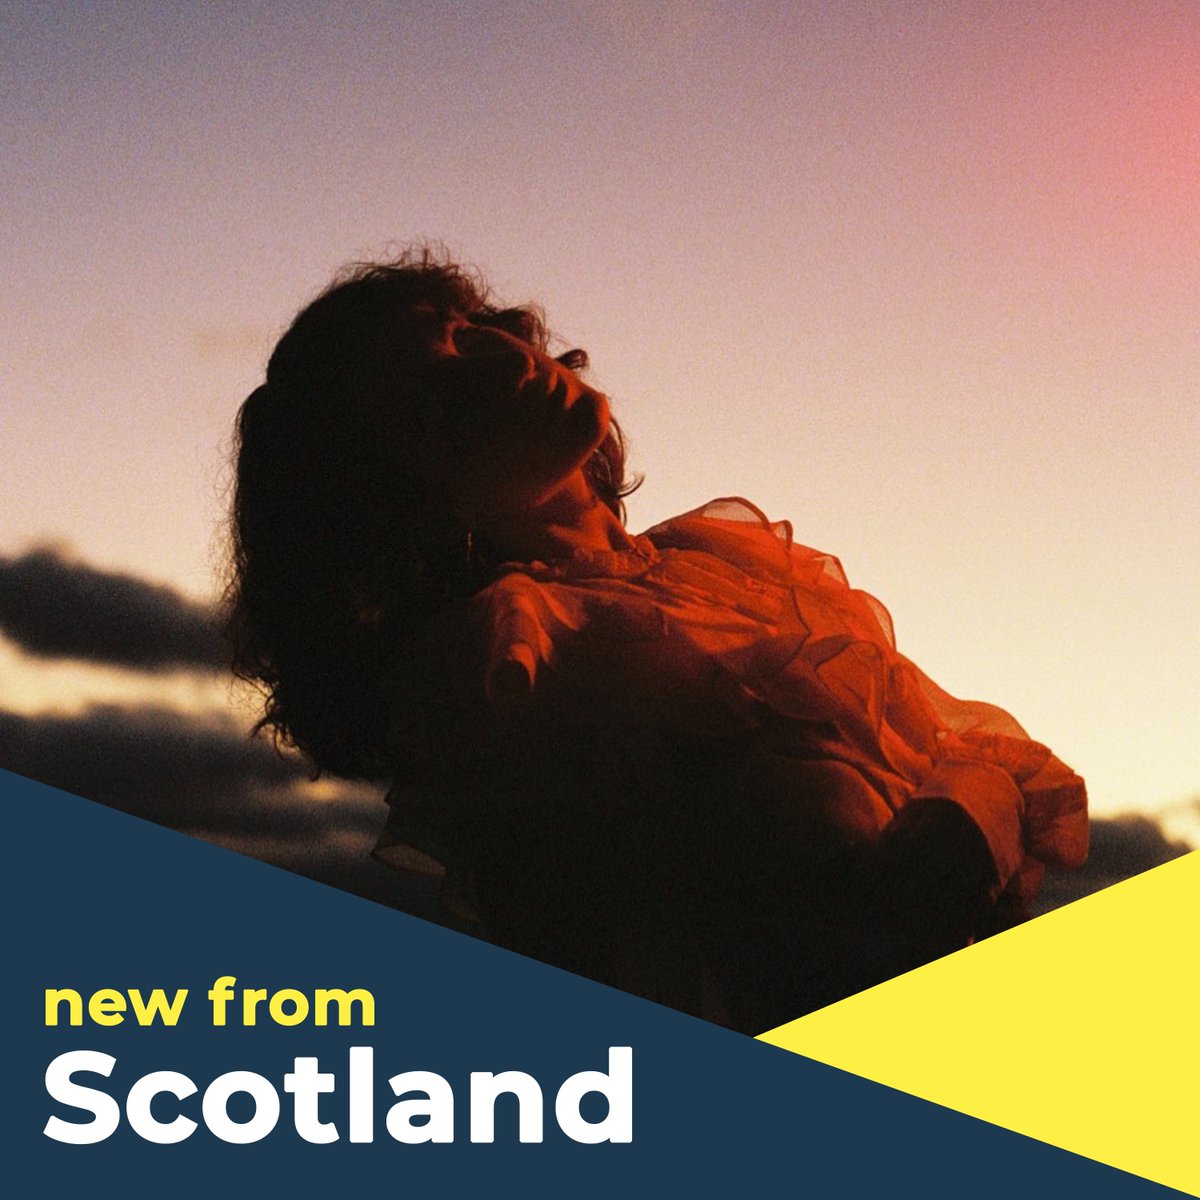 We’ve given our New From Scotland playlist an update with the latest tunes from around Scotland! Check out new releases from Grayling, Pearling, Naafi, @tamzenee, @CaraRoseMusic, @p_sweatpants, @katienicmusic and more! Listen now 👉 wide.ink/NewScot